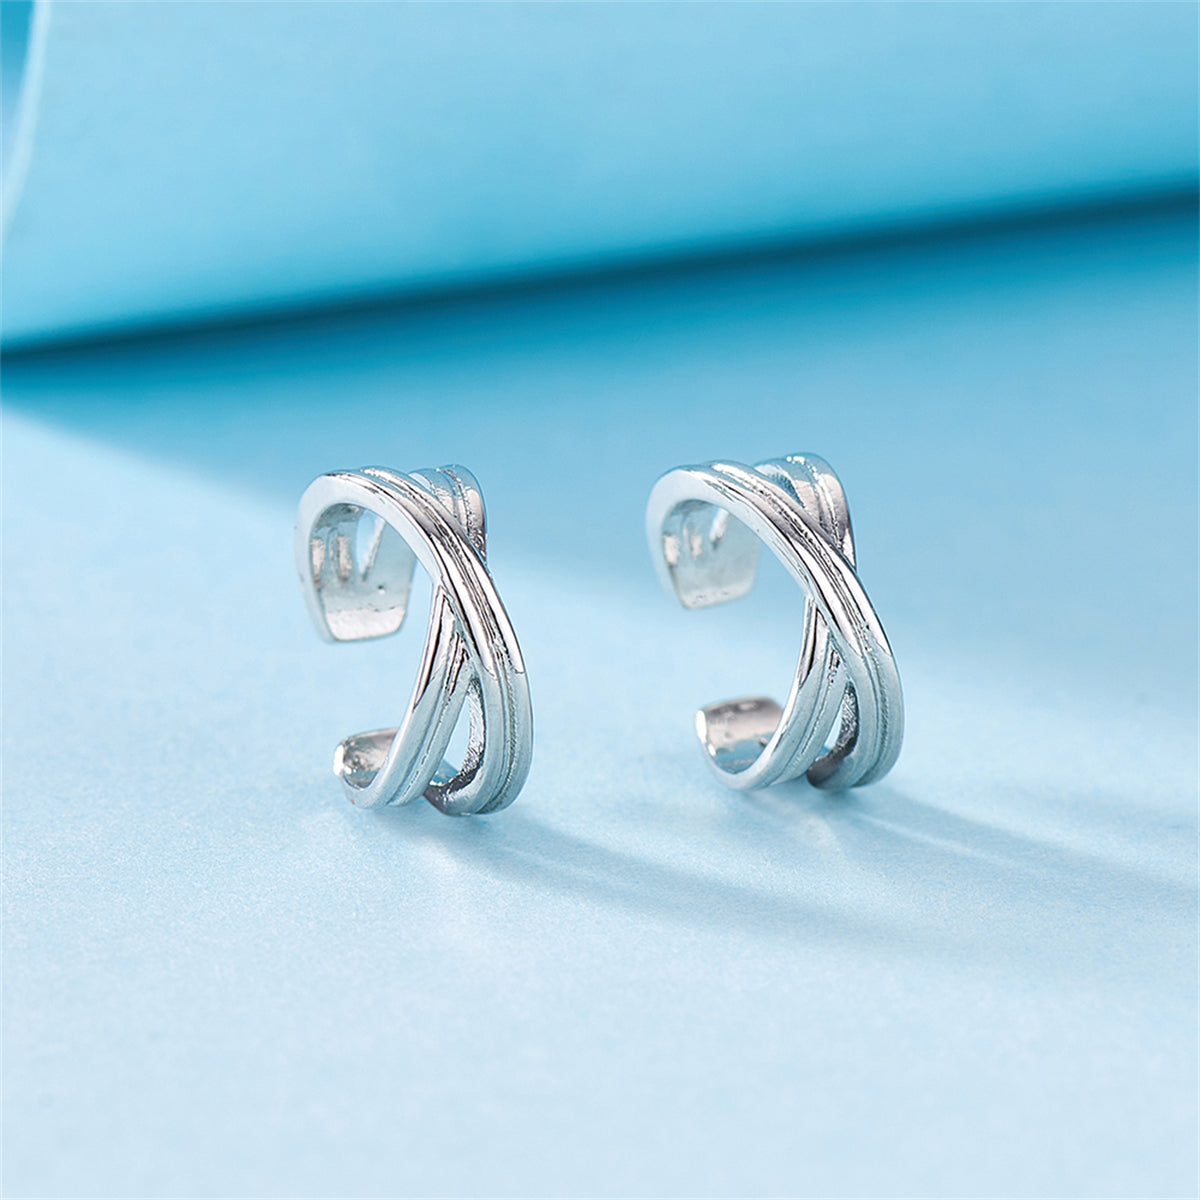 Silver-Plated Crossing Stacked Line Ear Cuffs